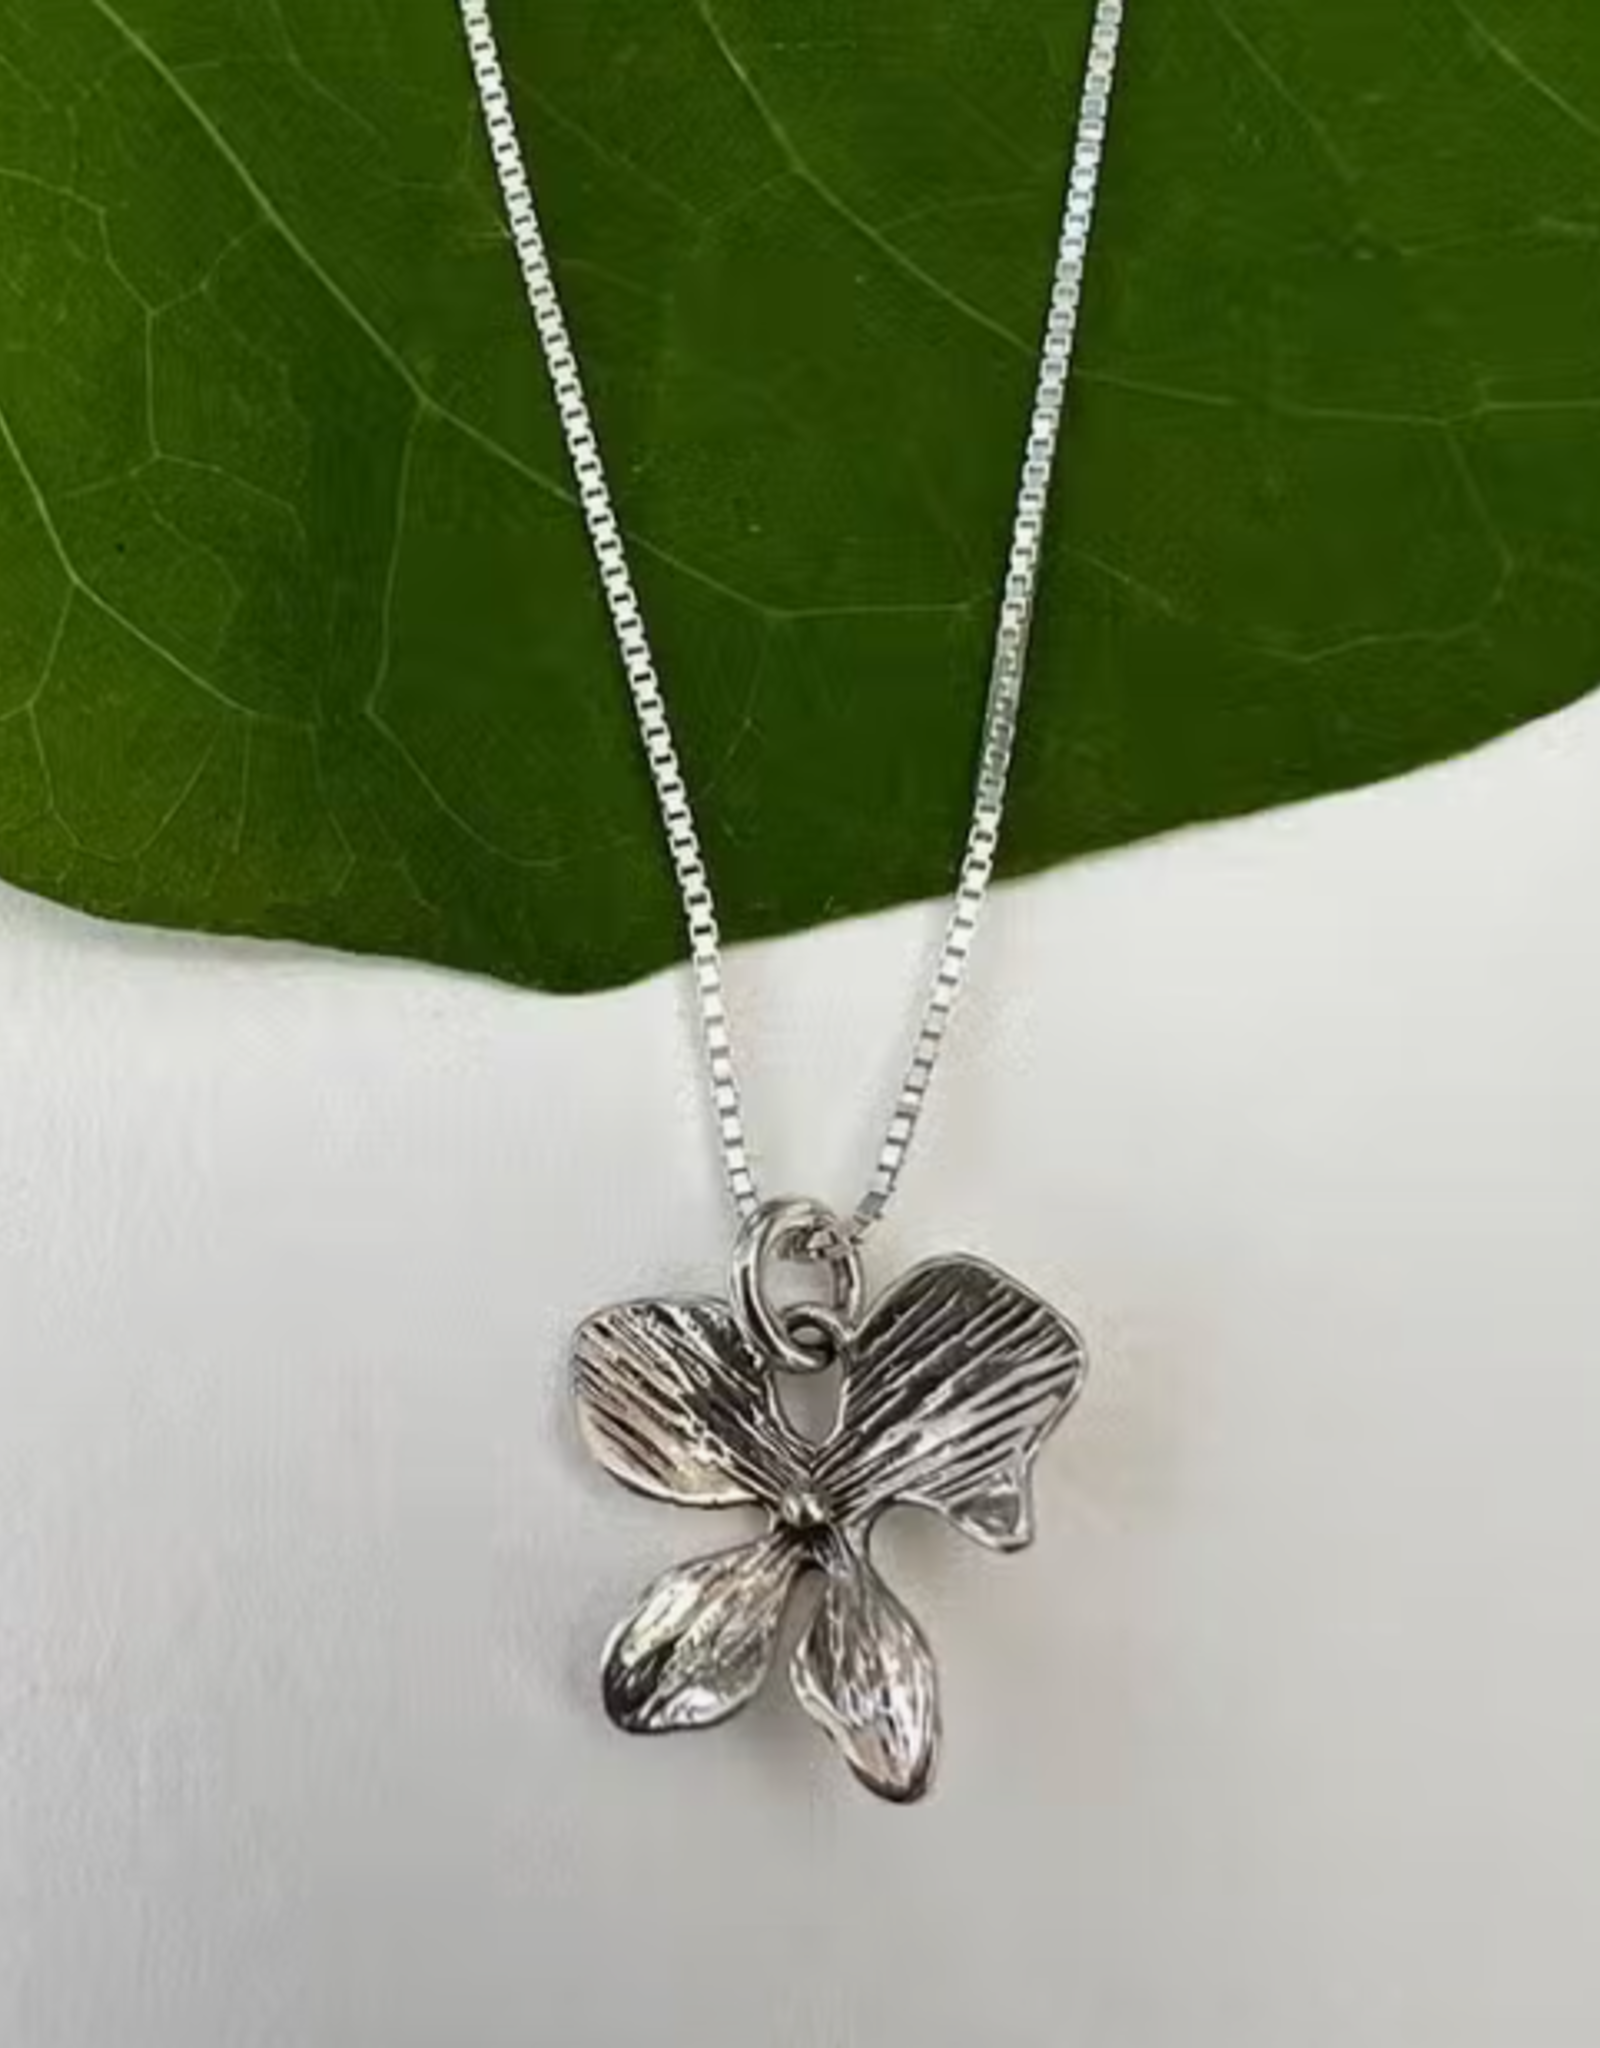 Women's Peace Collection In Flower Necklace